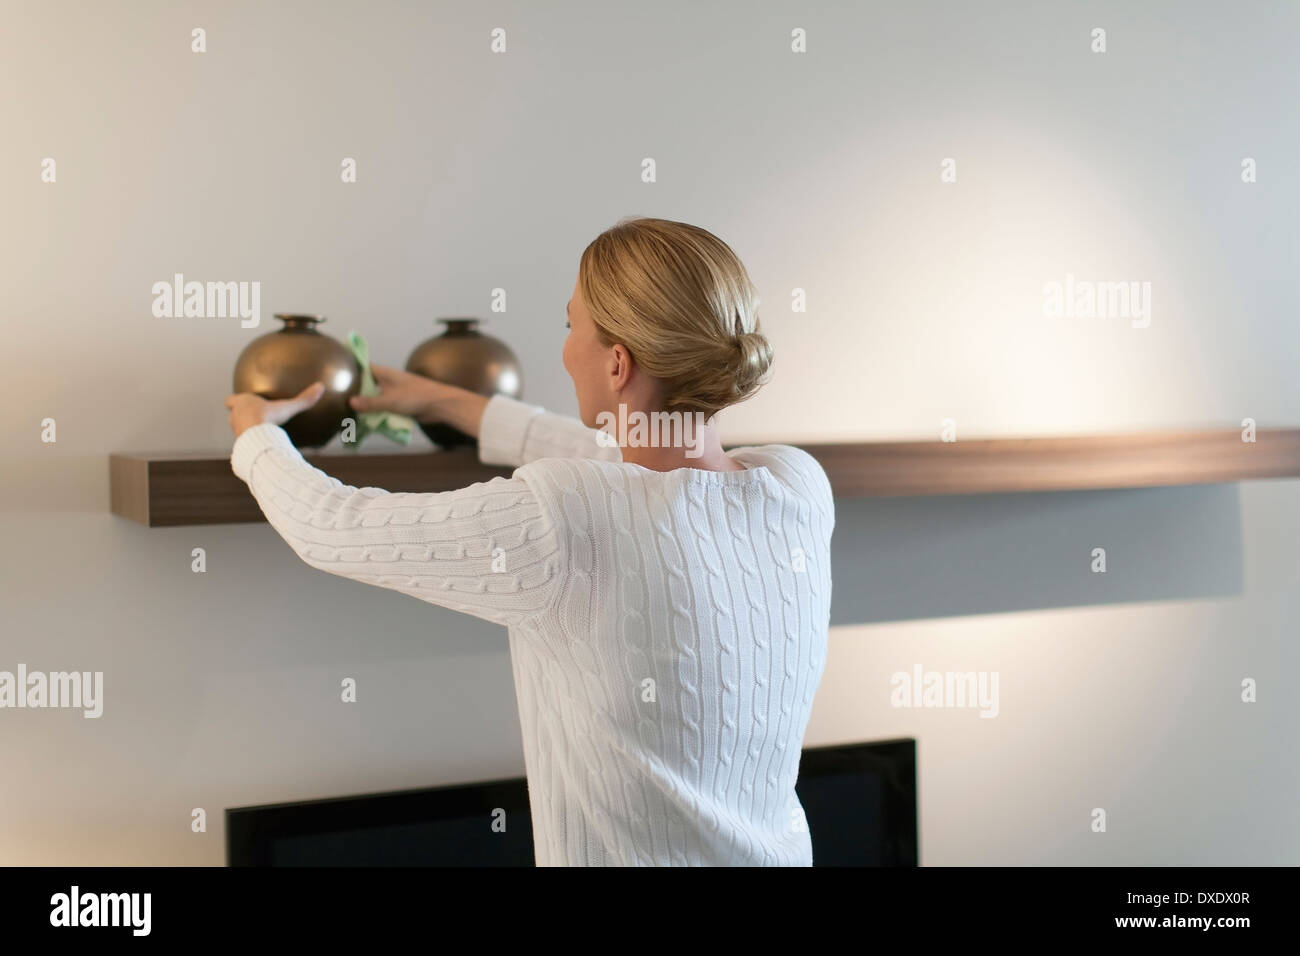 Woman cleaning house Stock Photo